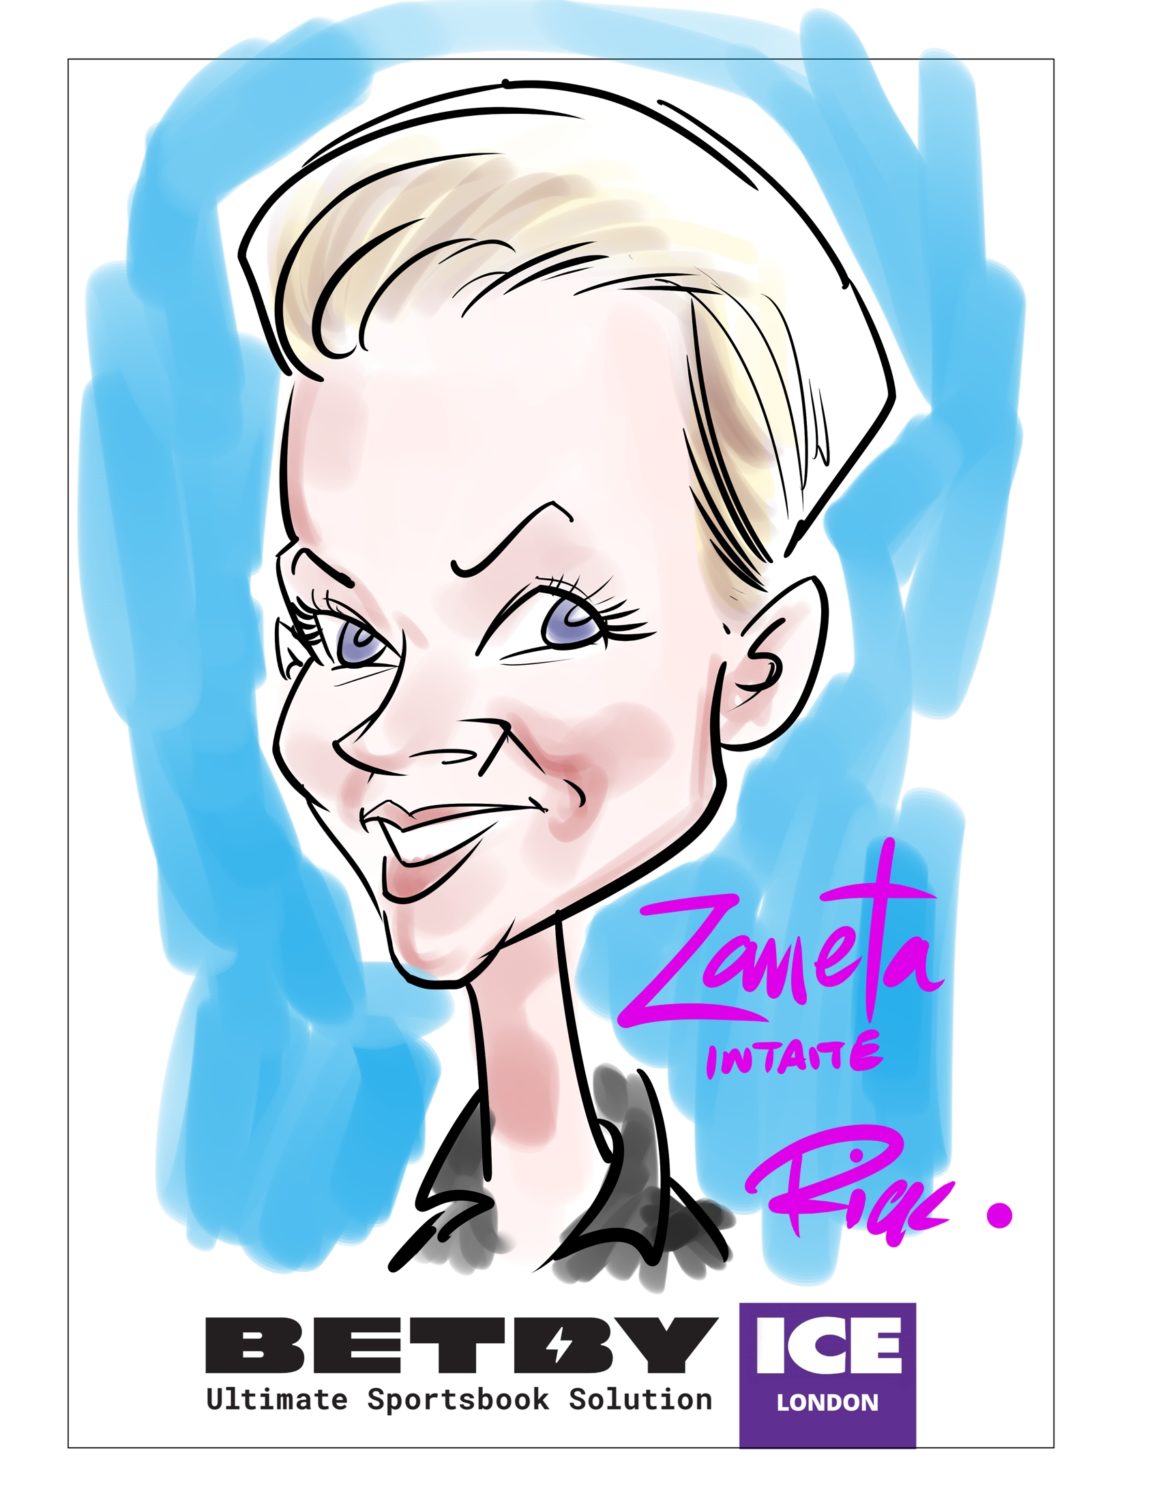 Quick 5 minute colour digital caricature from life